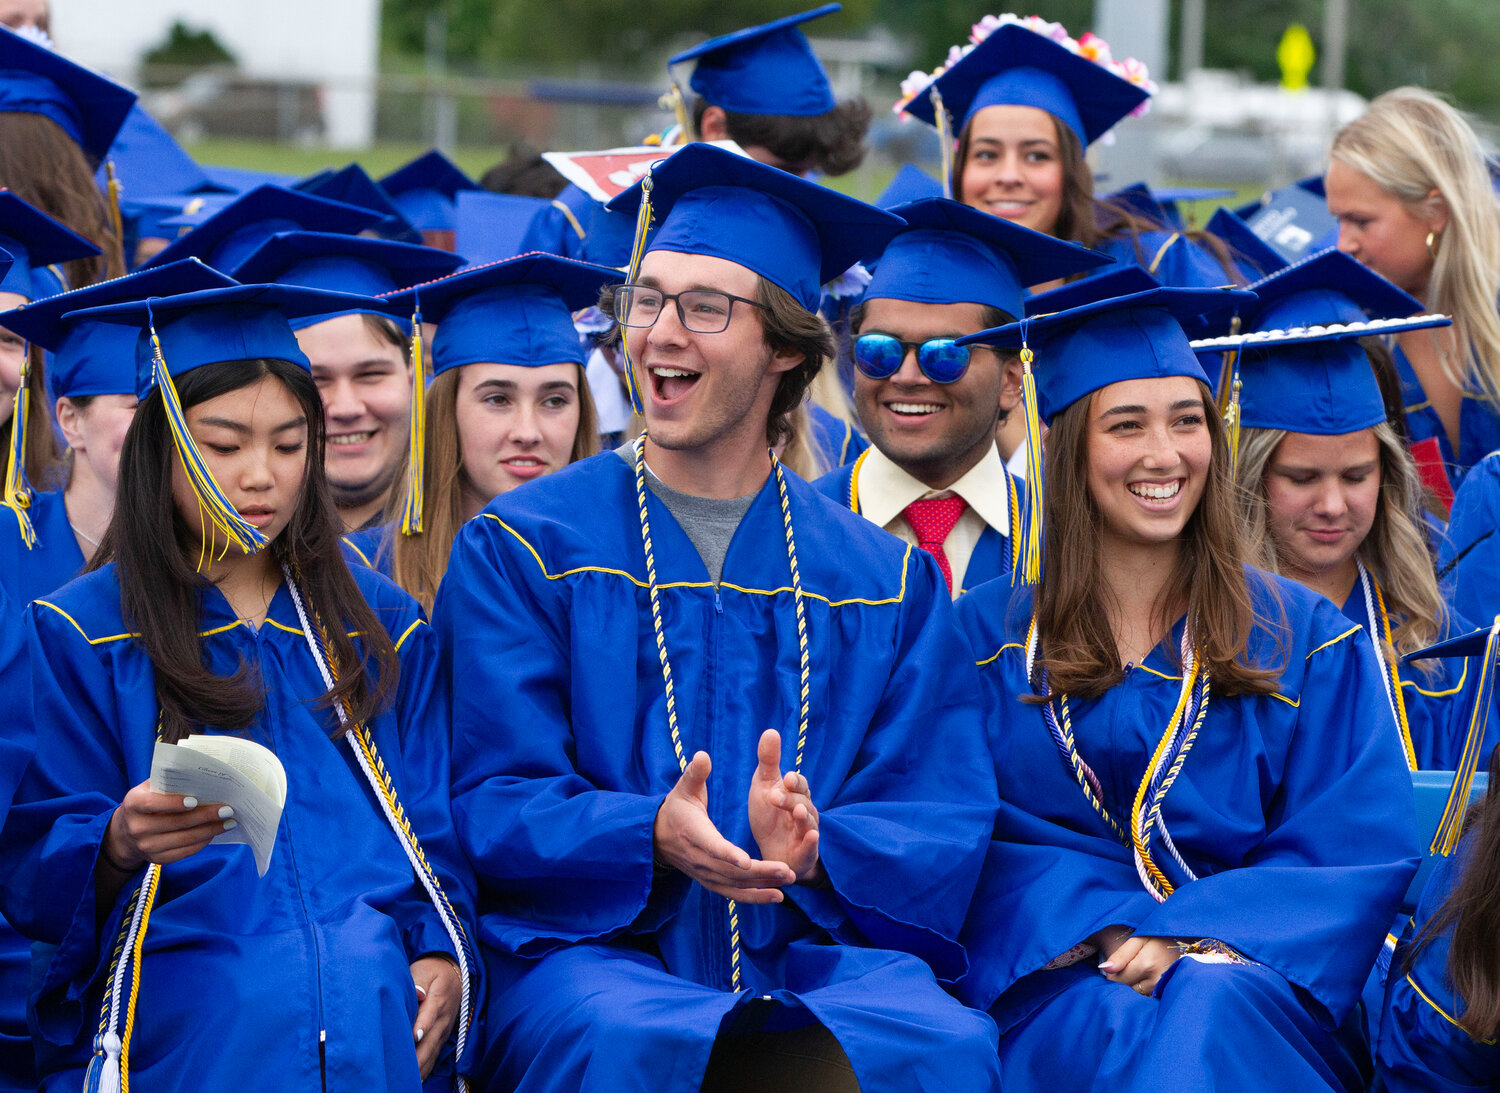 Charlie Whittaker (center) cheers during Sunday’s graduation ceremony at Barrington High School, while Katie Byon (left) and Sonya Pareek (right) sit nearby.